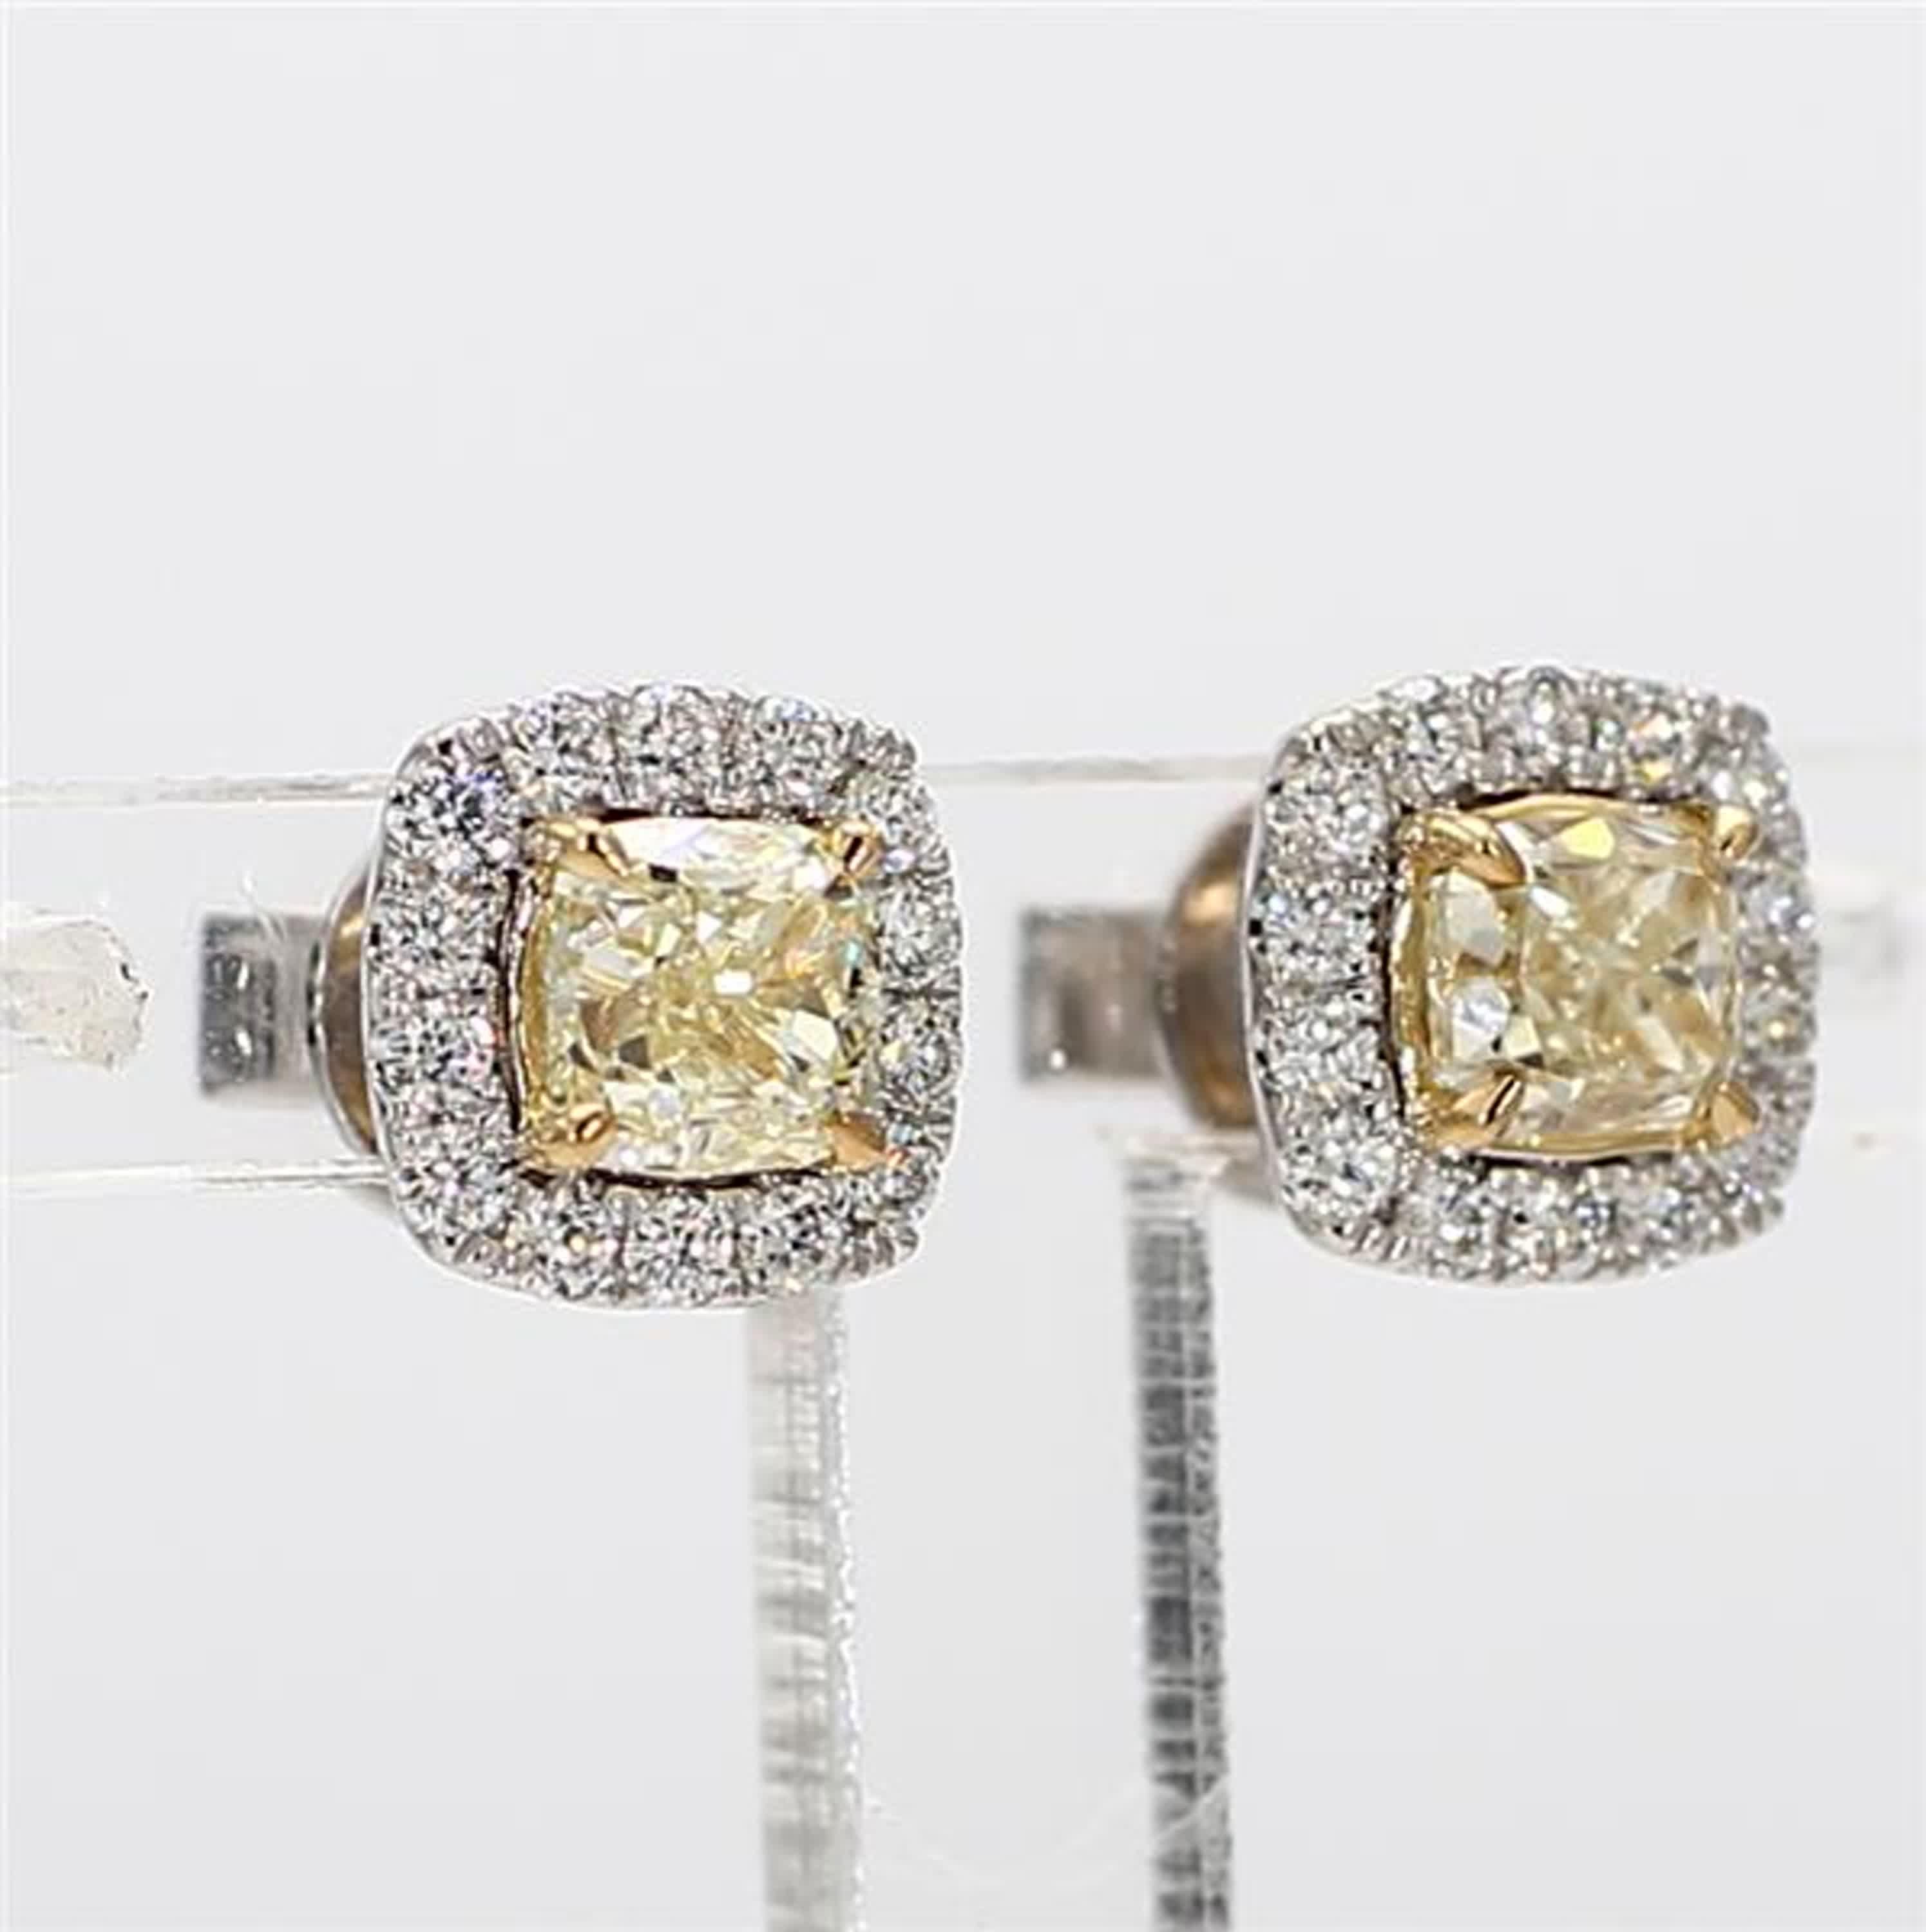 Natural Yellow Cushion and White Diamond 1.25 Carat TW Gold Stud Earrings 6